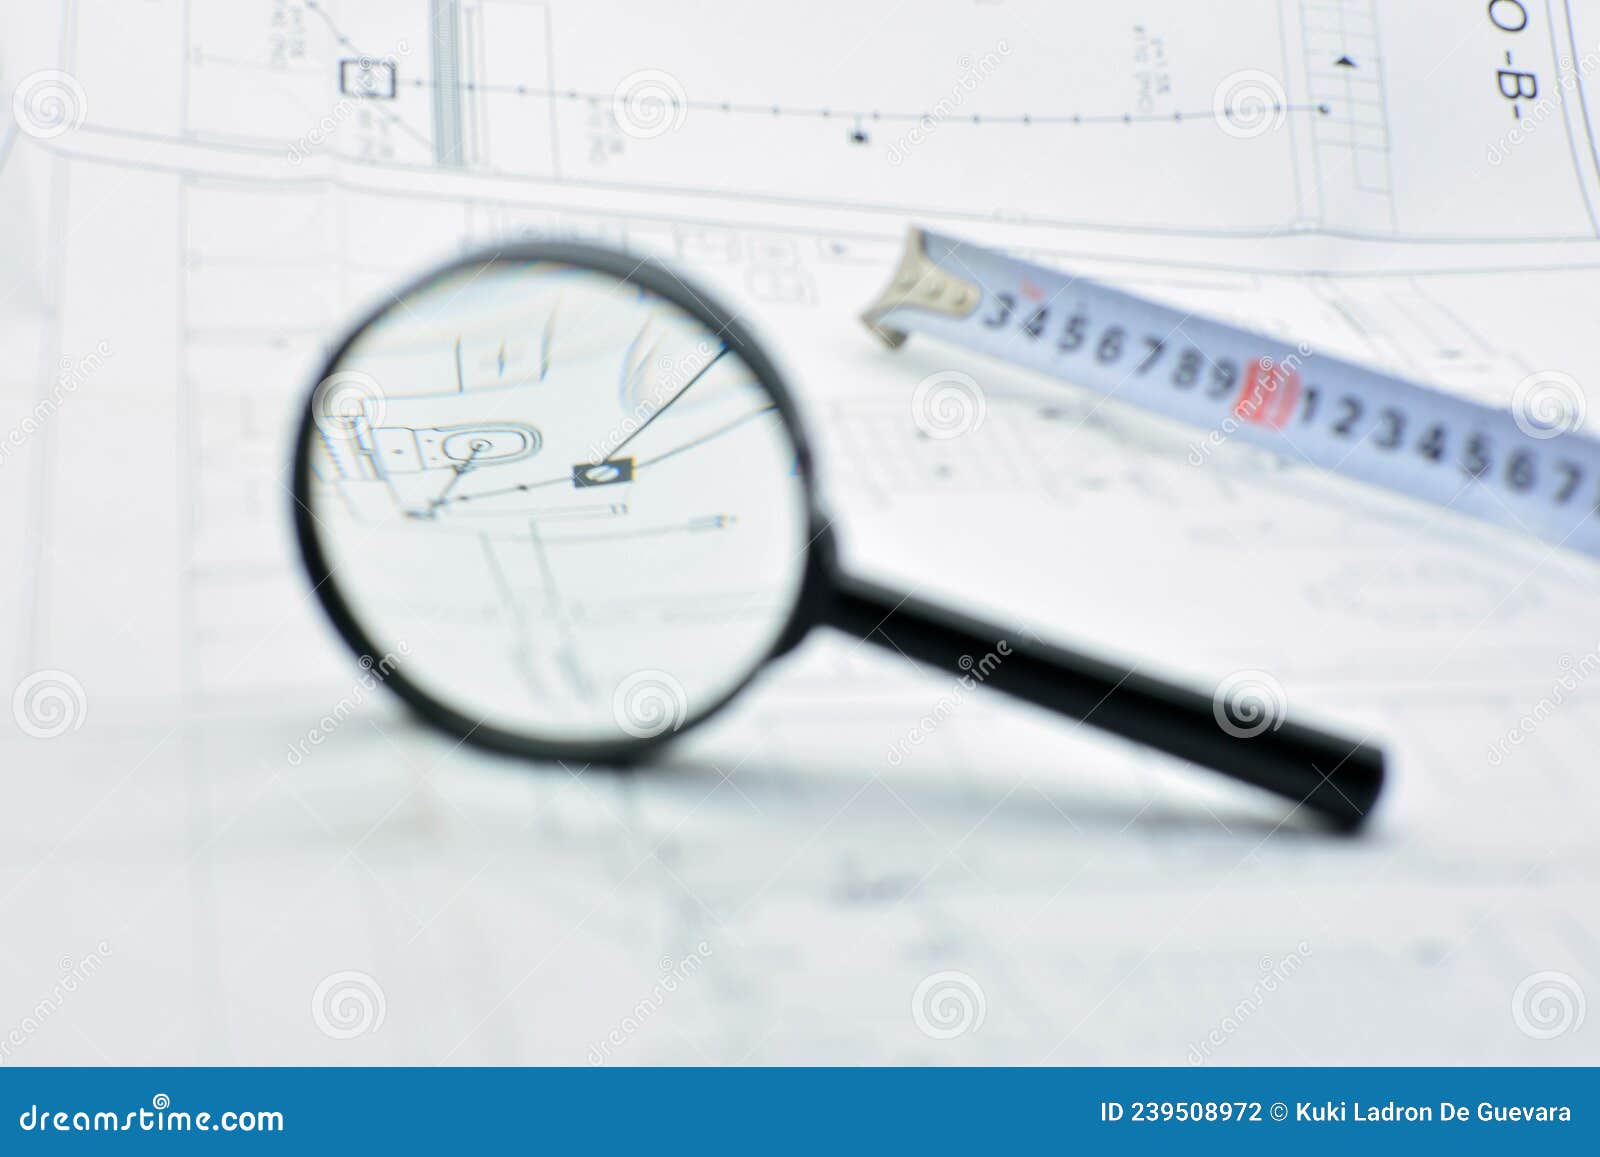 concept of looking at a blueprint with a magnifying glass